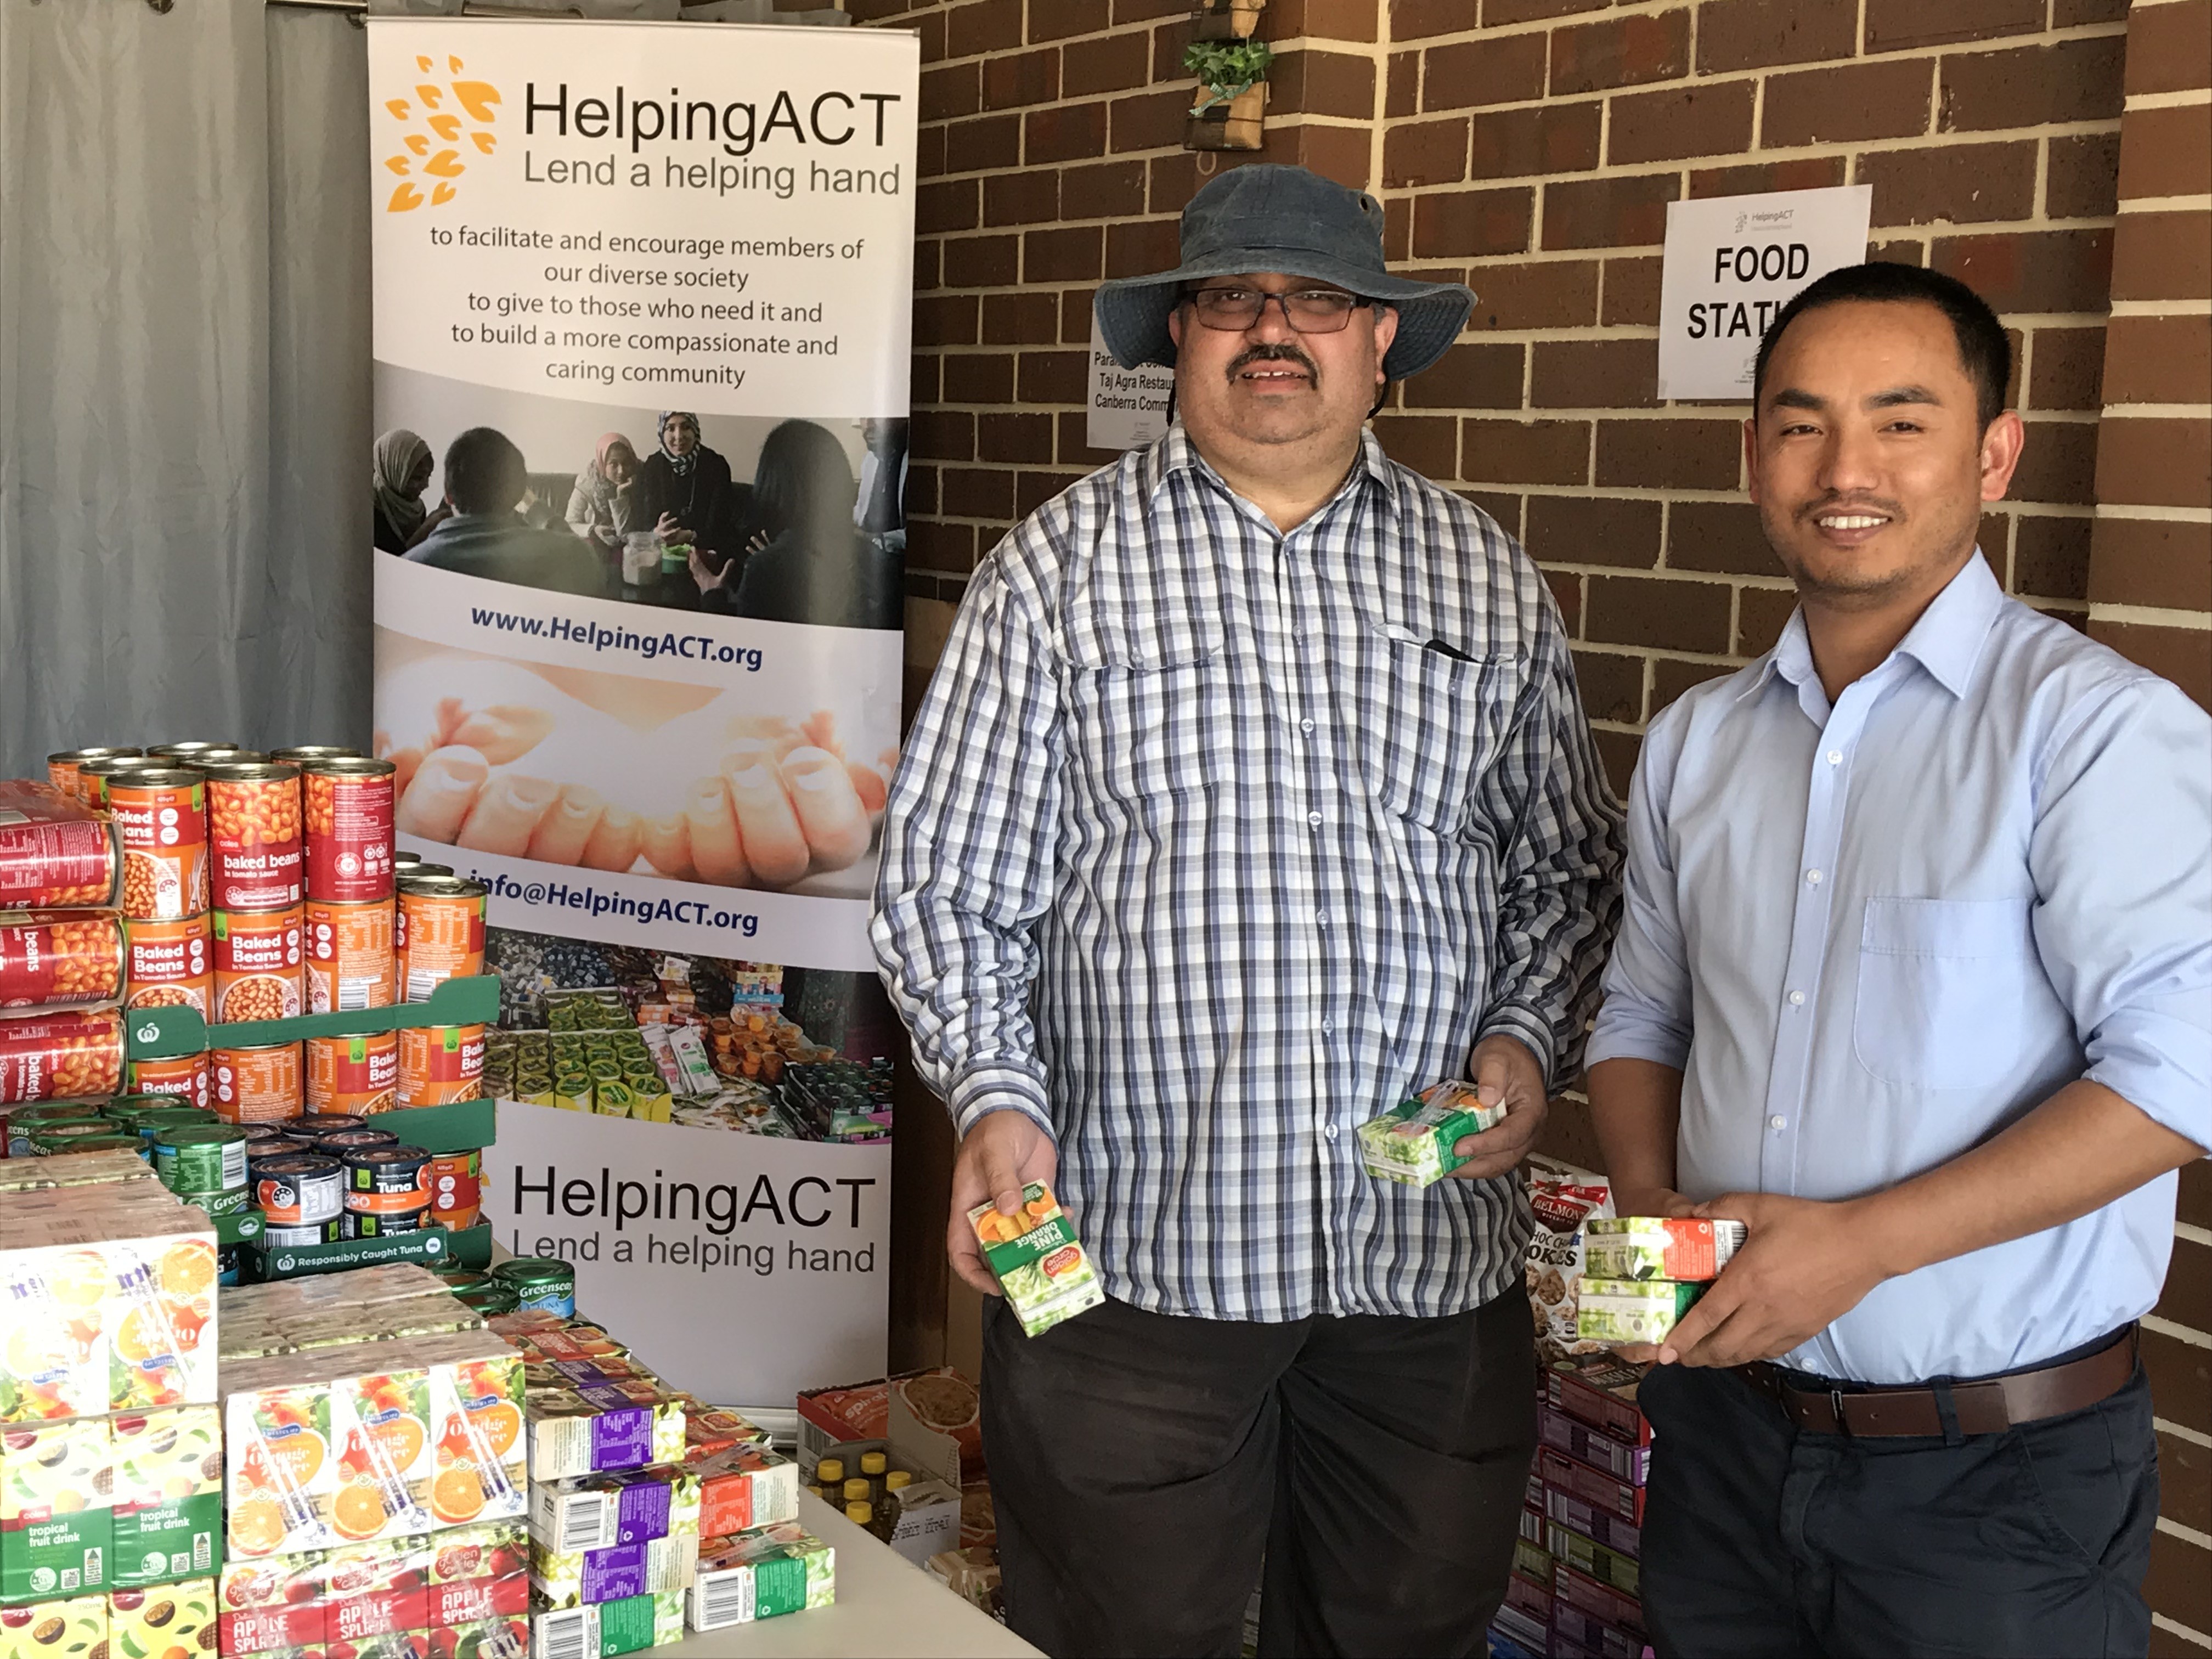 HelpingACT packs 110 hampers with a big serve of community heart